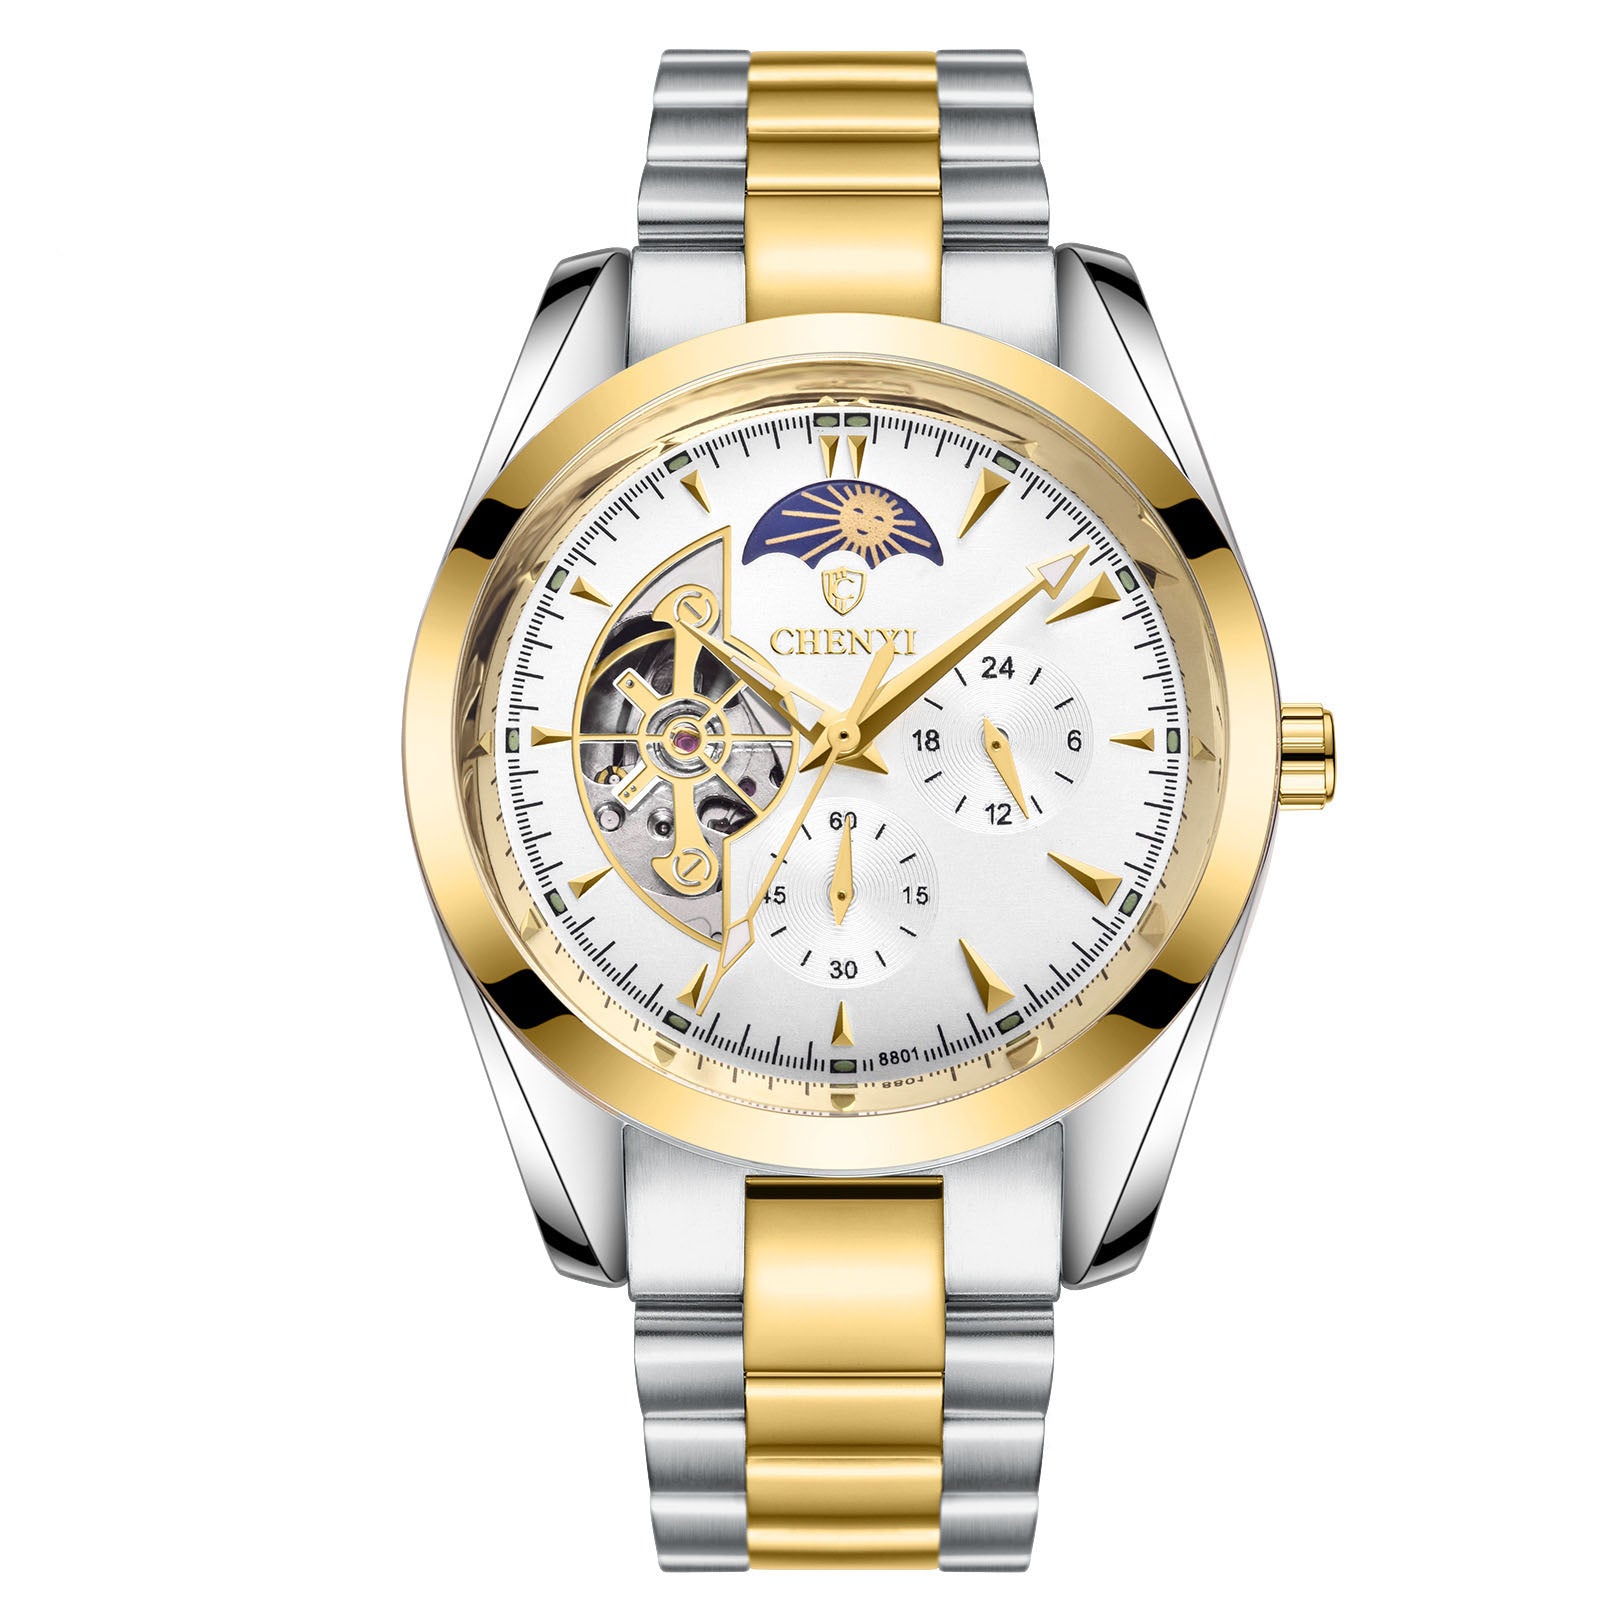 Men's Business Mechanical Watches - The Trend